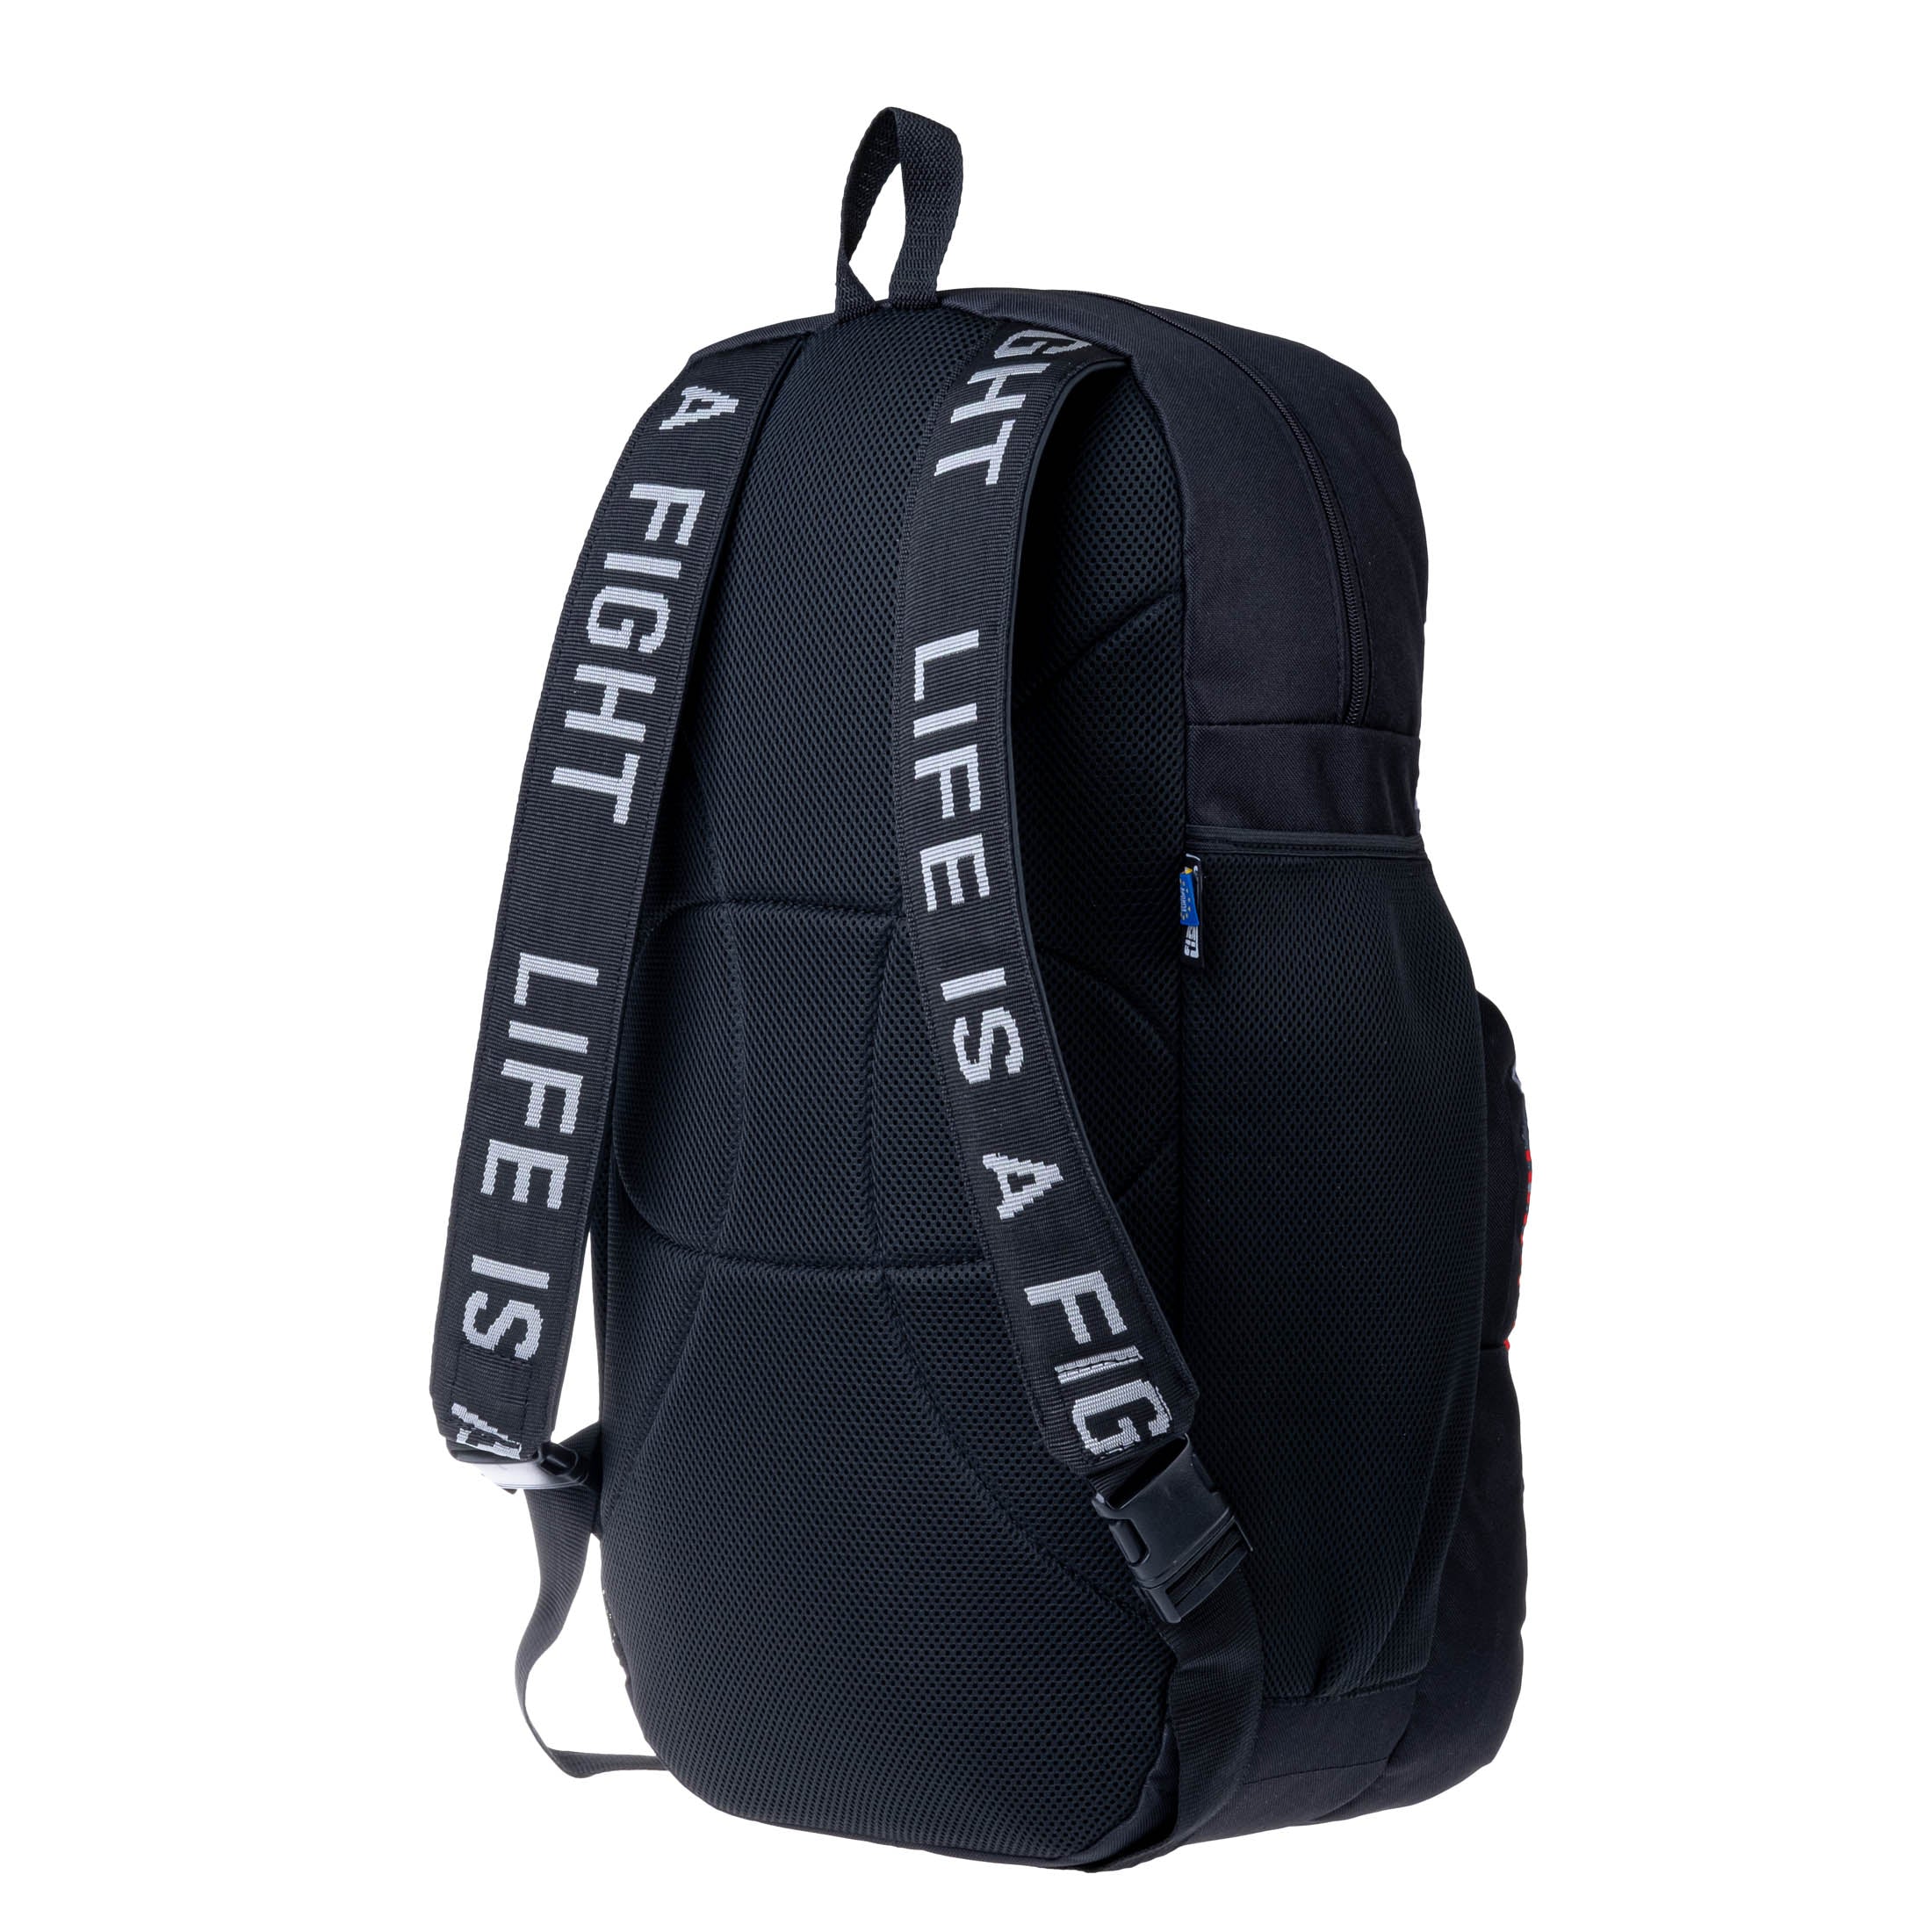 Fighter Backpack Squad - urban camo